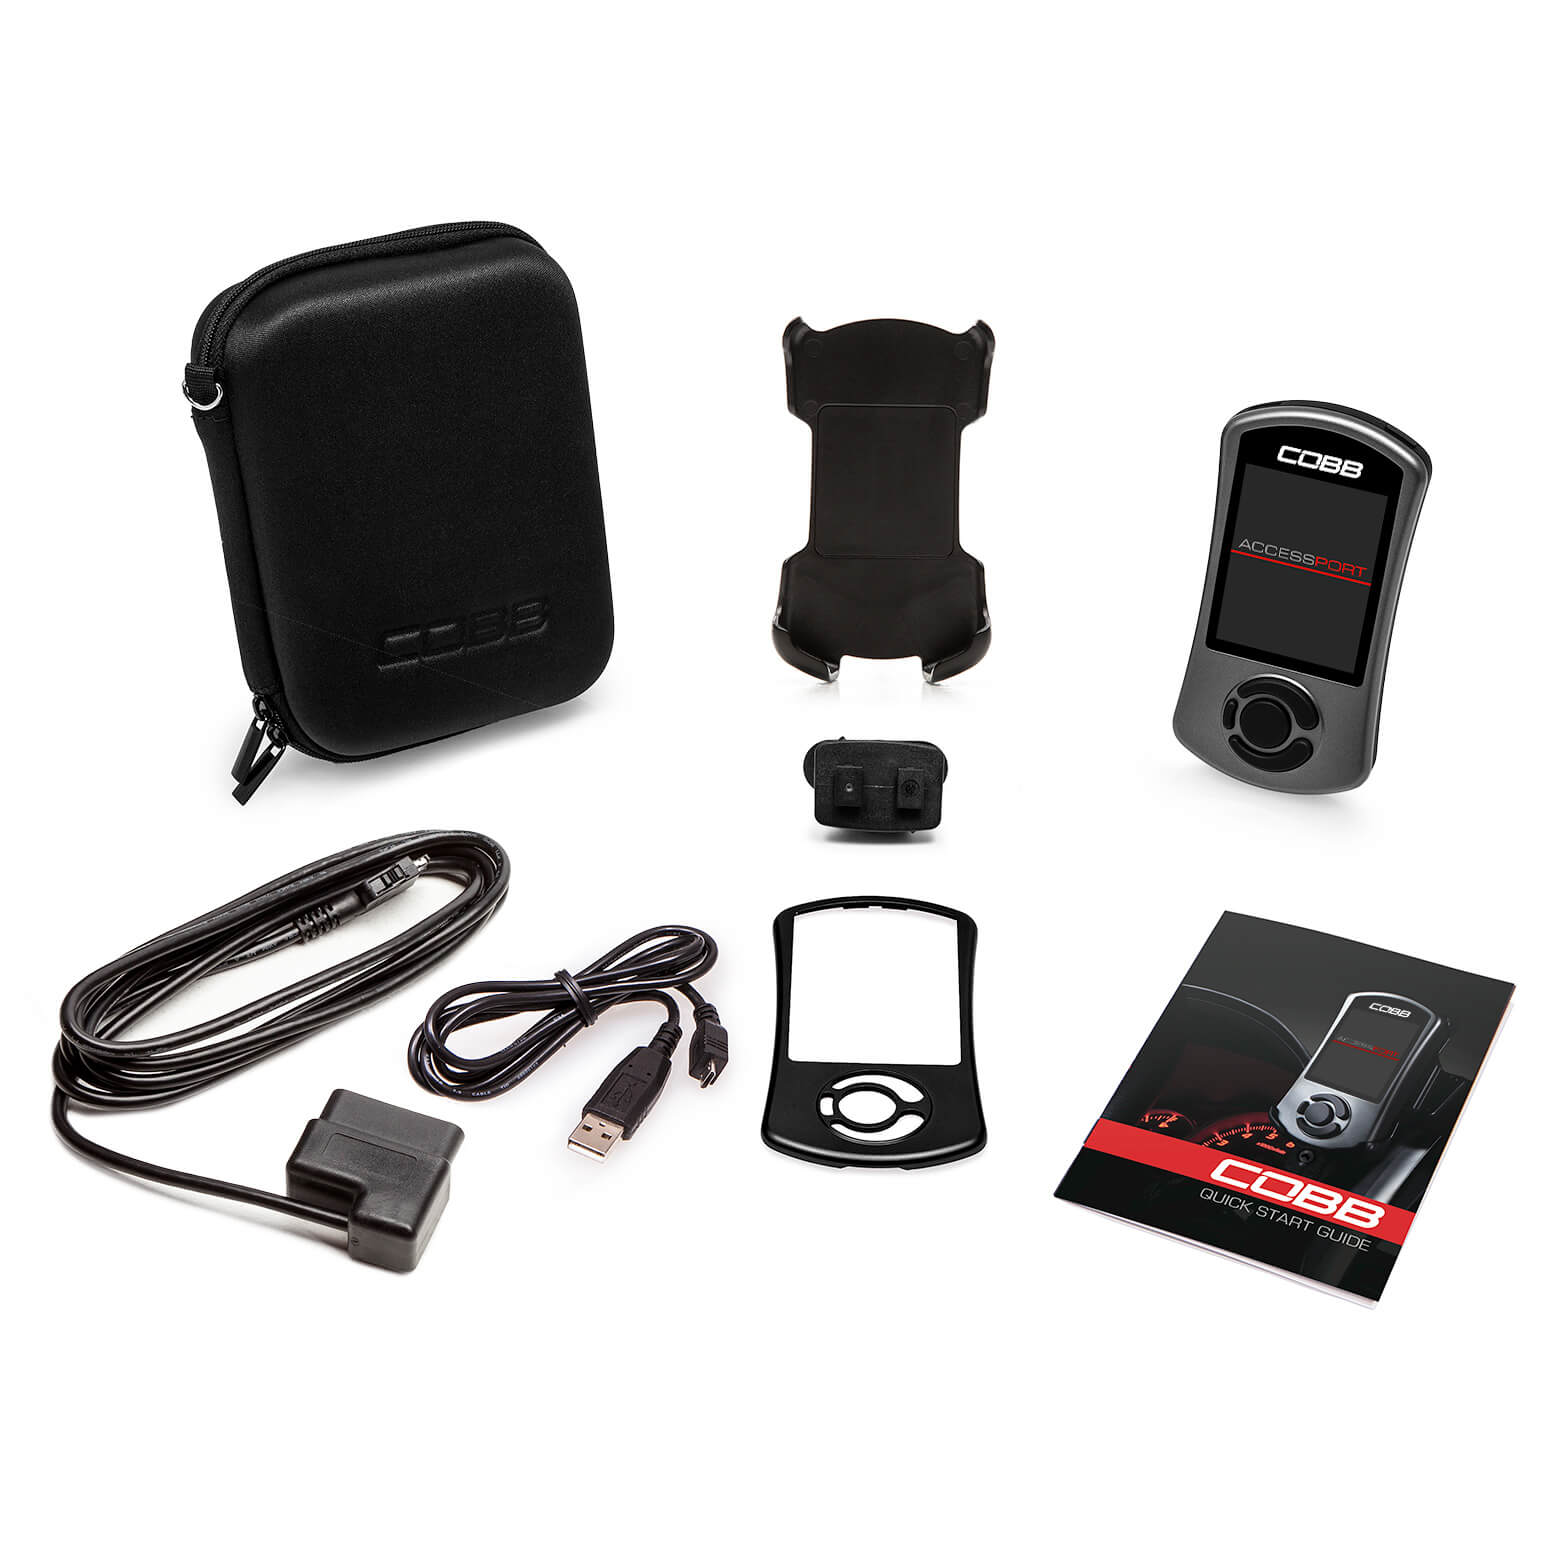 COBB POR0070010-PDK PORSCHE Stage 1 Power Package with PDK Flashing 981 Cayman, Boxster Photo-3 